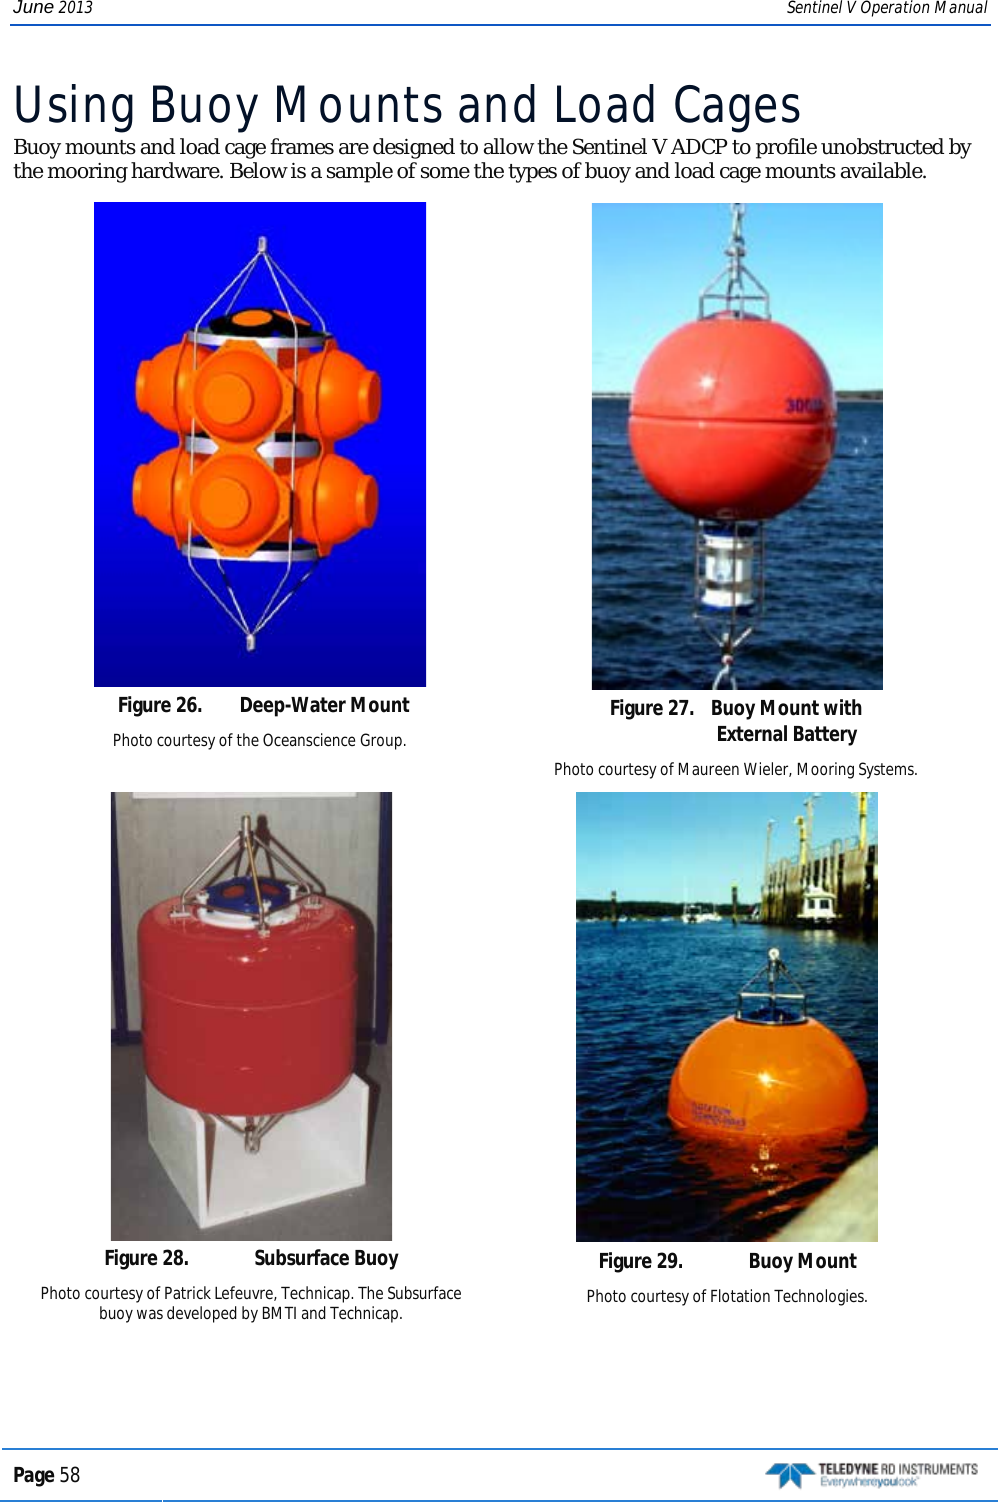 June 2013 Sentinel V Operation Manual Using Buoy Mounts and Load Cages Buoy mounts and load cage frames are designed to allow the Sentinel V ADCP to profile unobstructed by the mooring hardware. Below is a sample of some the types of buoy and load cage mounts available.  Figure 26.  Deep-Water Mount Photo courtesy of the Oceanscience Group.   Figure 27.  Buoy Mount with  External Battery Photo courtesy of Maureen Wieler, Mooring Systems.  Figure 28.  Subsurface Buoy Photo courtesy of Patrick Lefeuvre, Technicap. The Subsurface buoy was developed by BMTI and Technicap.  Figure 29.  Buoy Mount Photo courtesy of Flotation Technologies. Page 58   